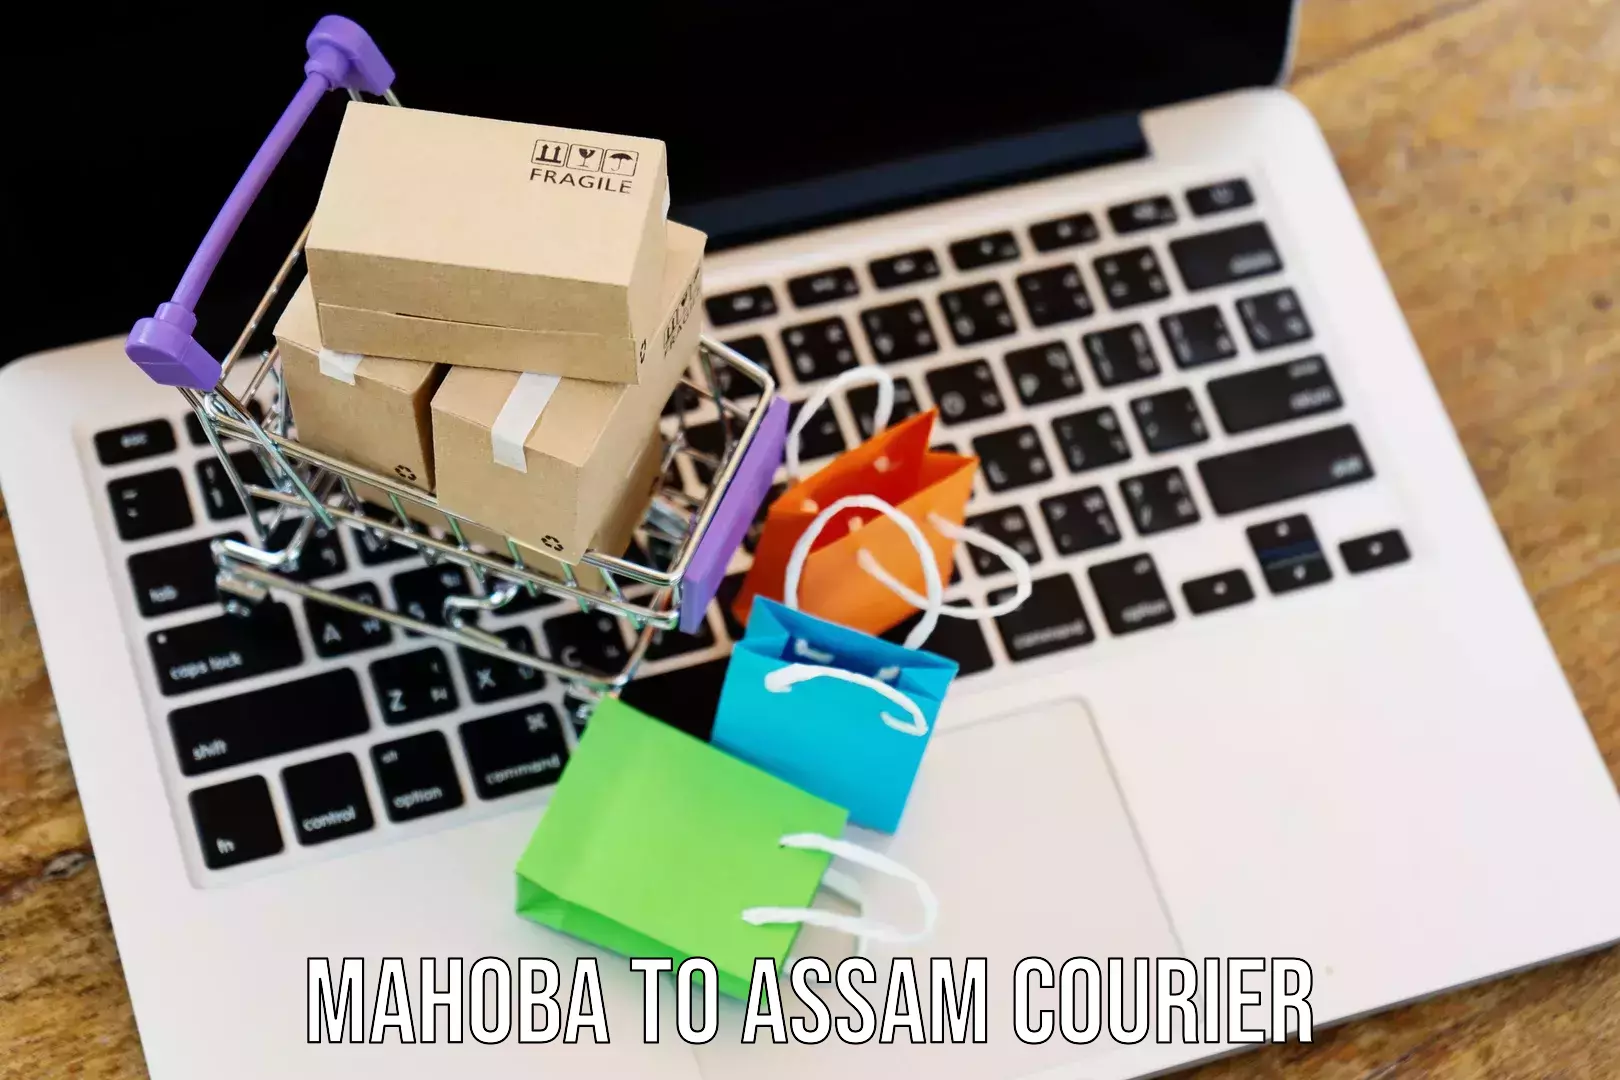 Next-day delivery options Mahoba to Assam